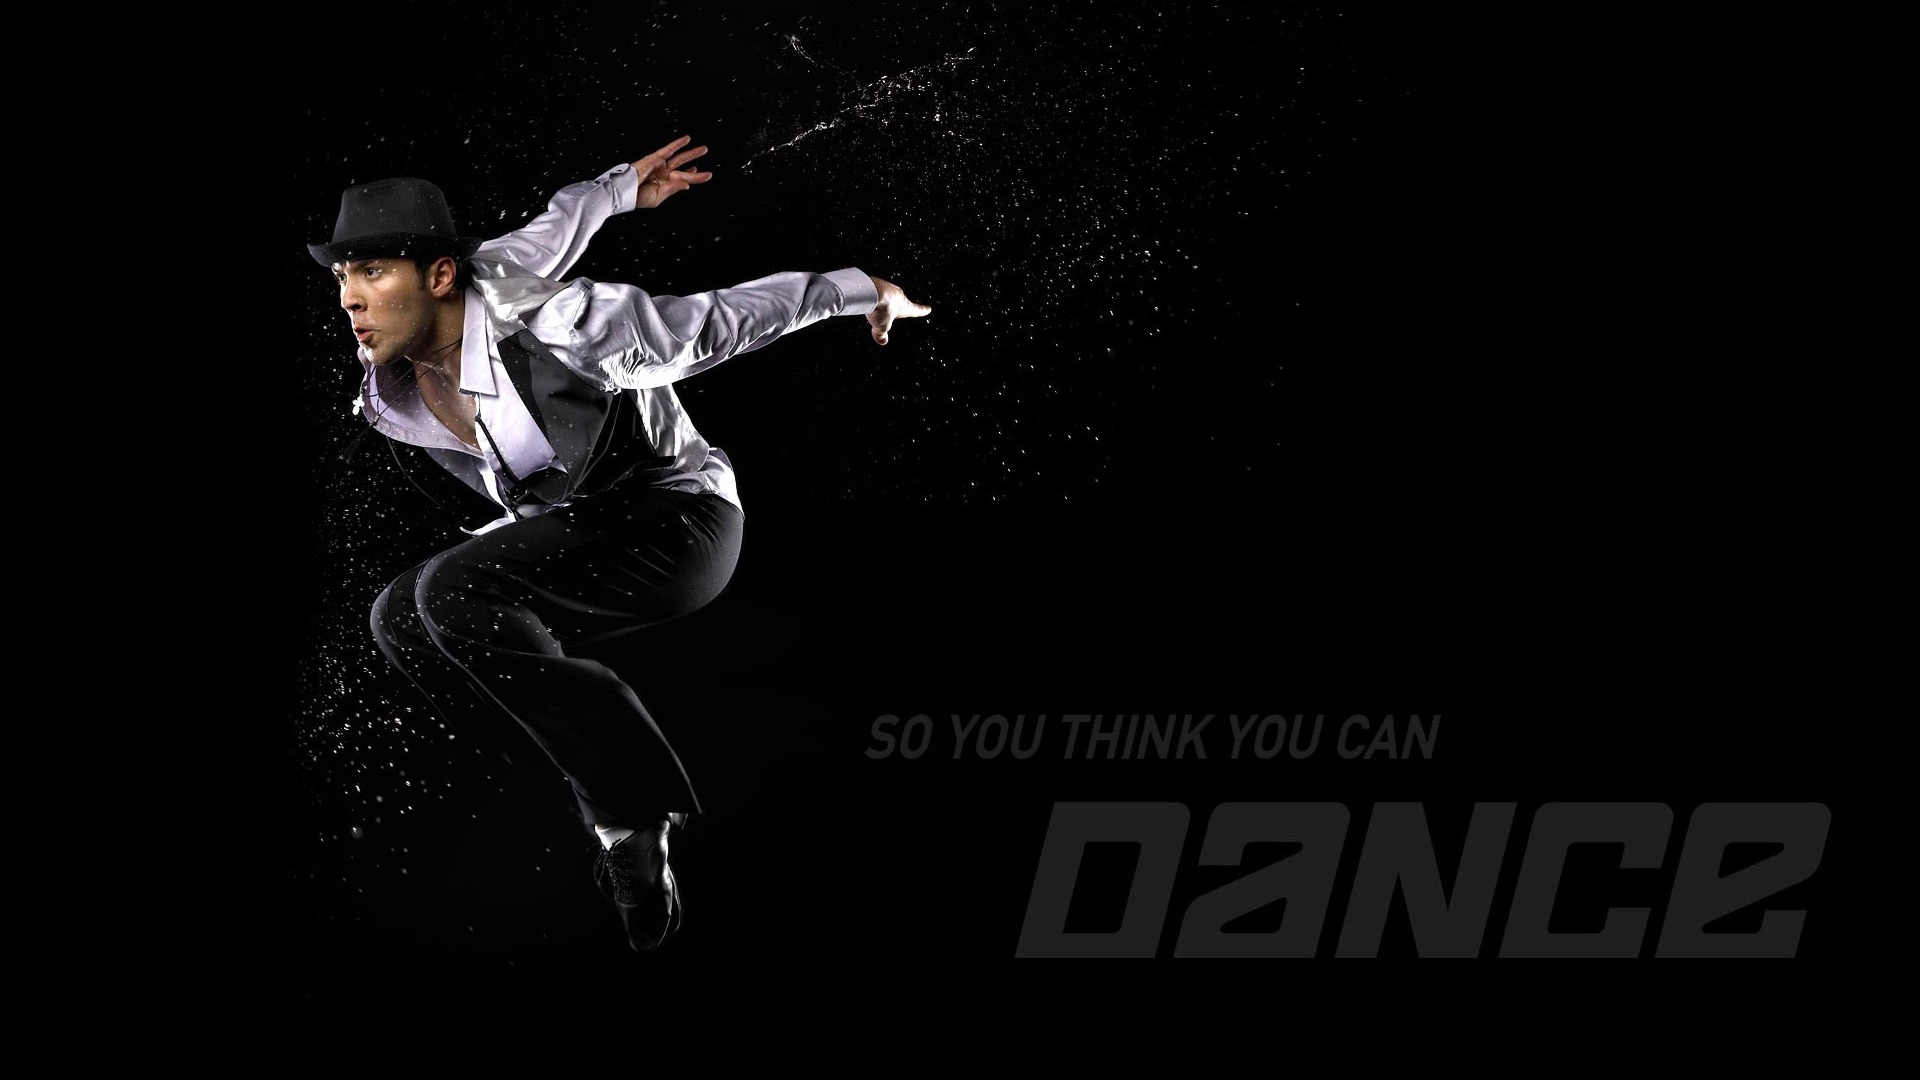 So You Think You Can Dance 舞林争霸 壁纸(一)12 - 1920x1080